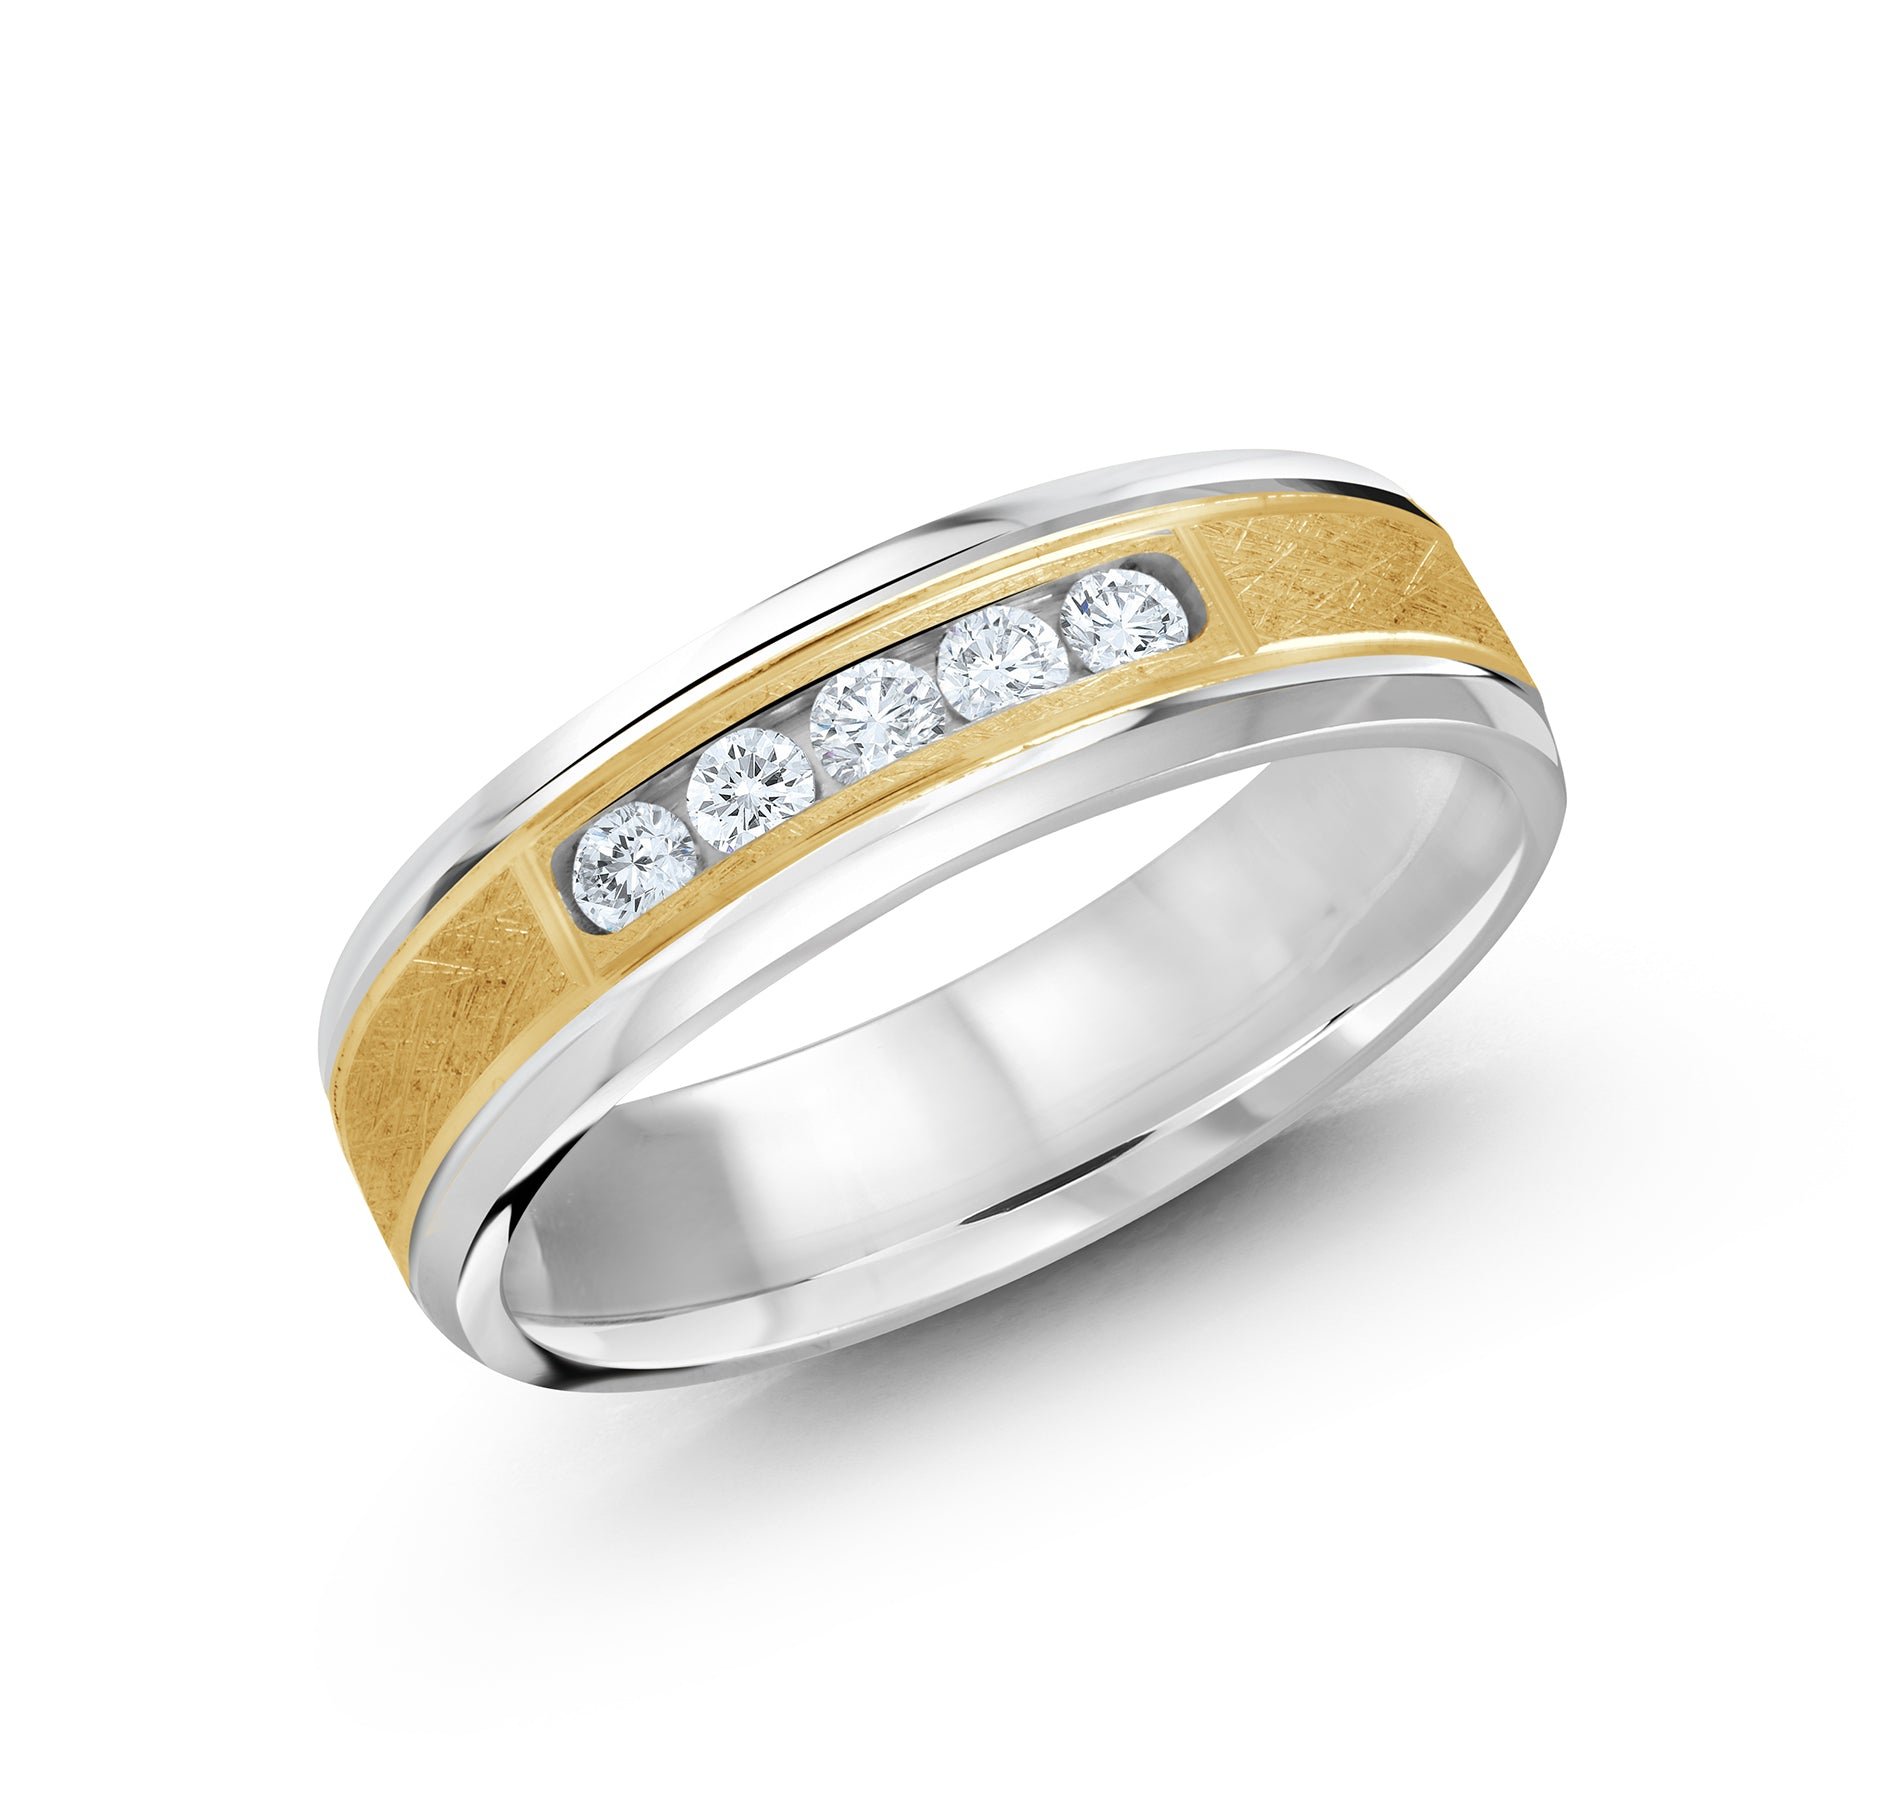 14kt White Gold & 14kt Yellow Gold/18kt White Gold & 18kt Yellow Gold/earth grown/lab grown/top